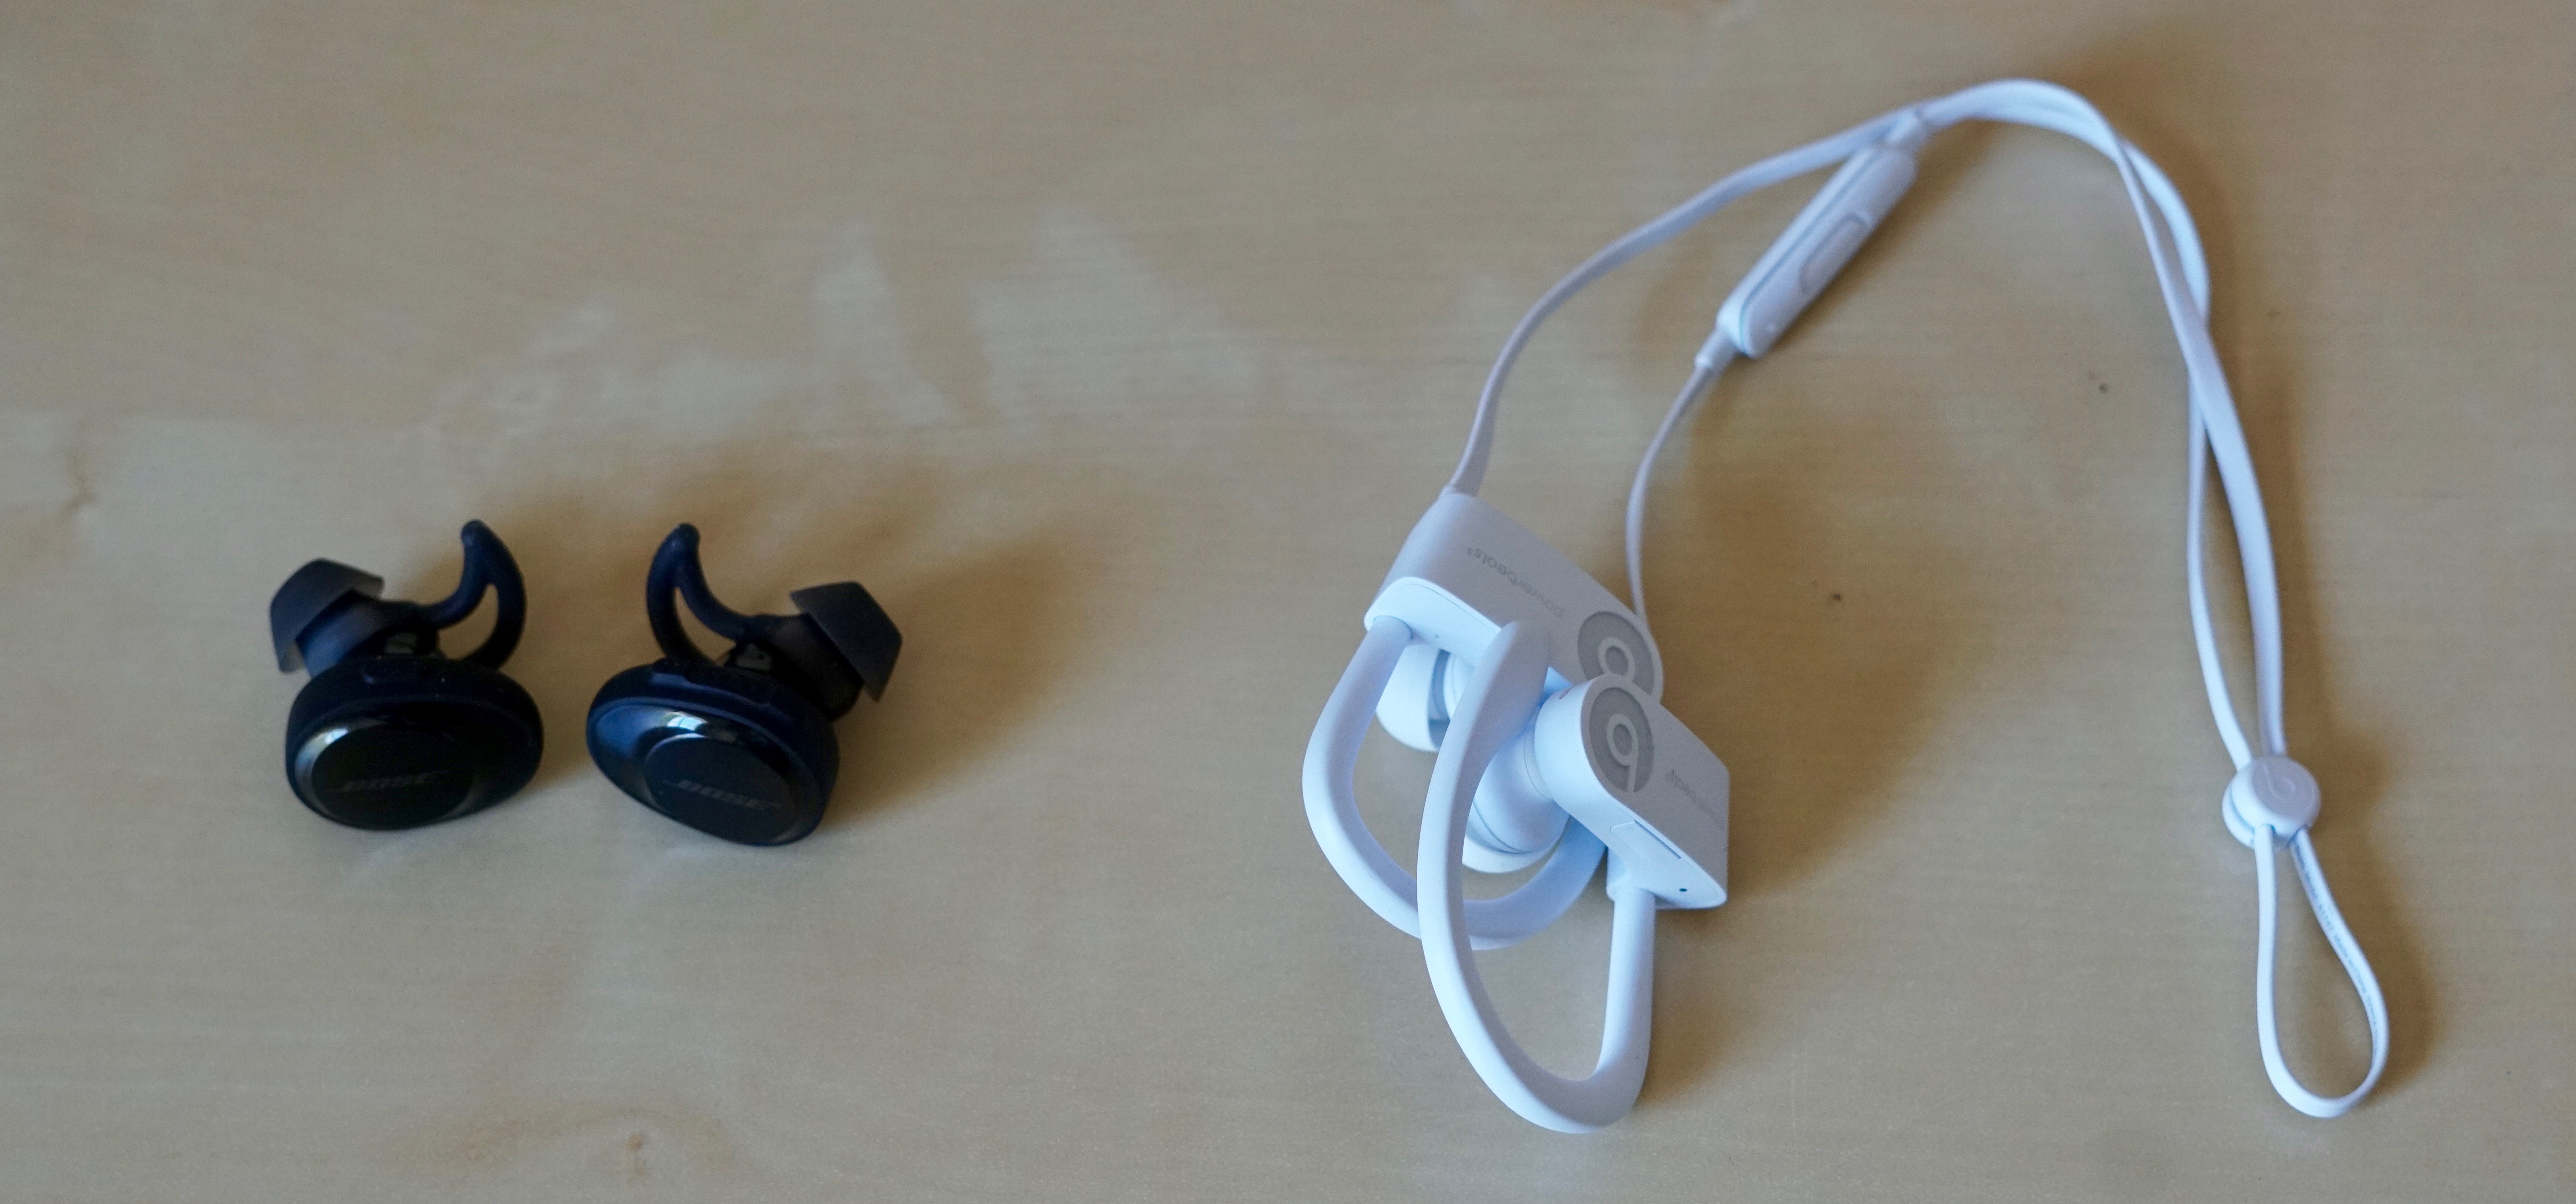 Review: Bose Free versus AirPods - 9to5Mac